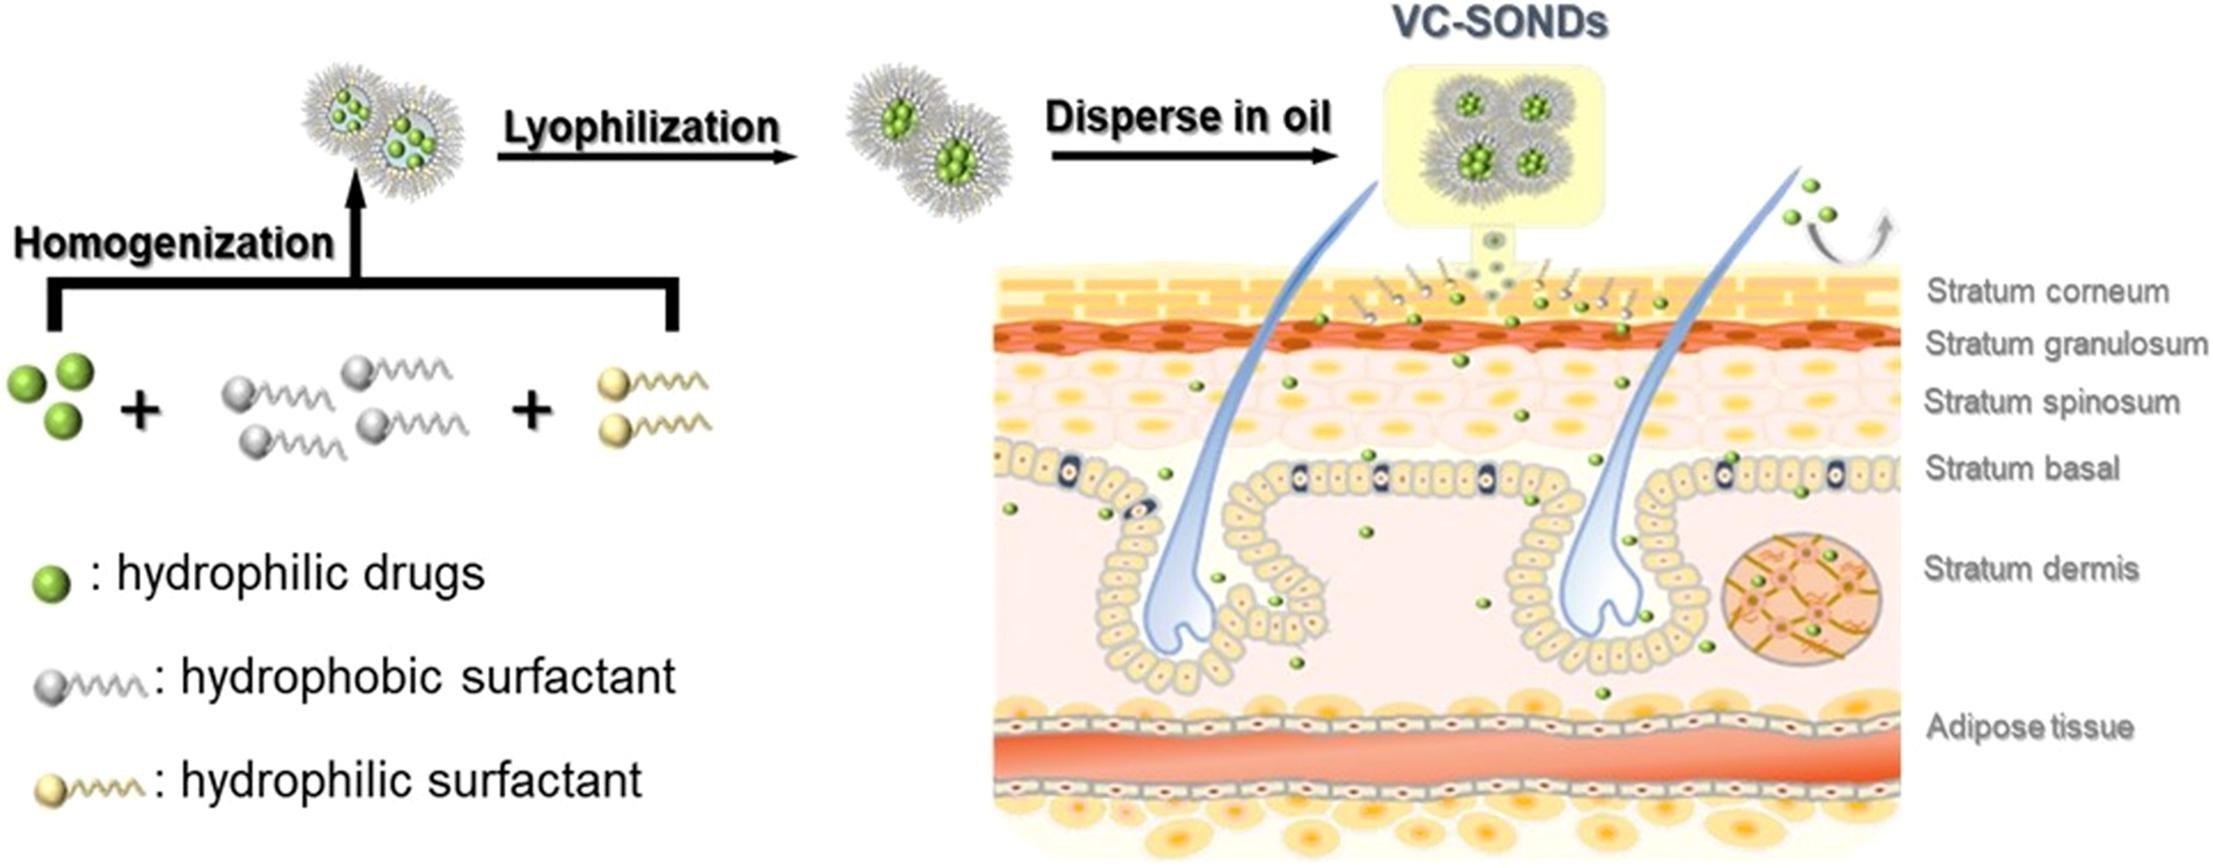 Solid-in-oil nanodispersion as a novel topical transdermal delivery to enhance stability and skin permeation and retention of hydrophilic drugs l-ascorbic acid